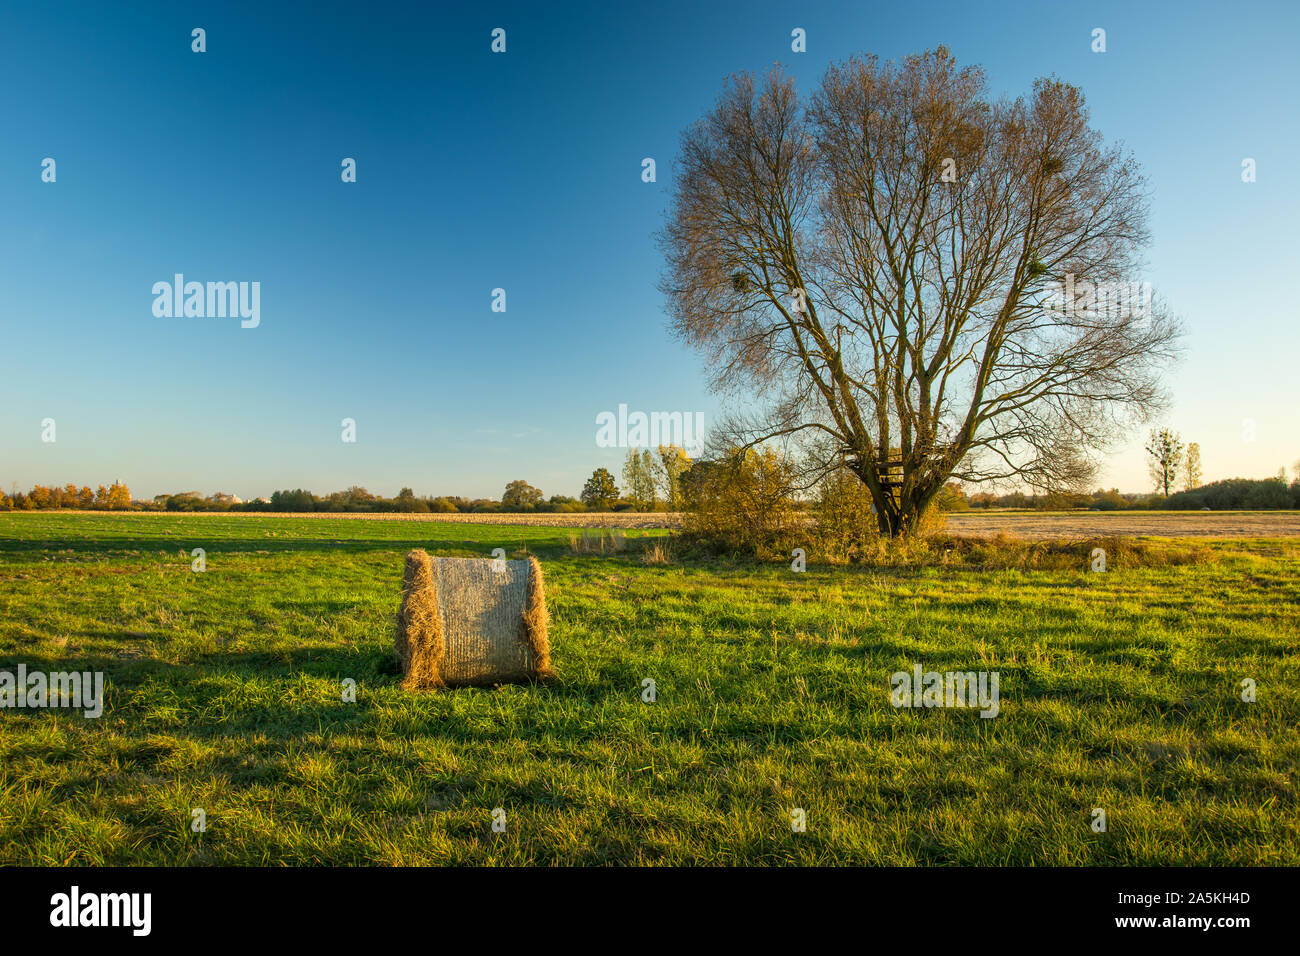 Hay bale on a green meadow, large tree without leaves and blue sky Stock Photo